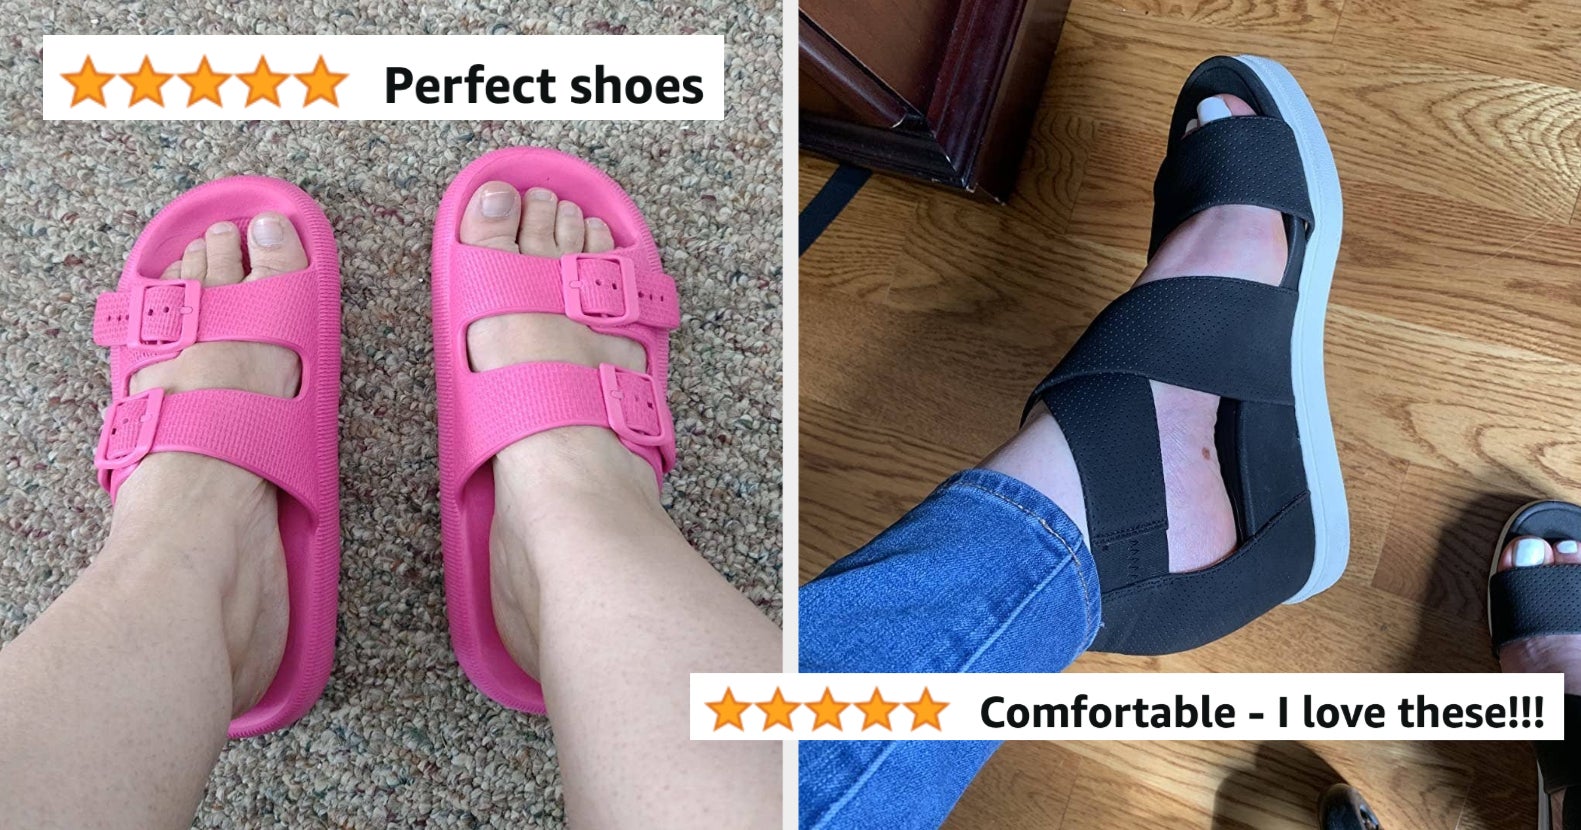 23 Best Sandals For Wide Feet That Are Cute And Comfy